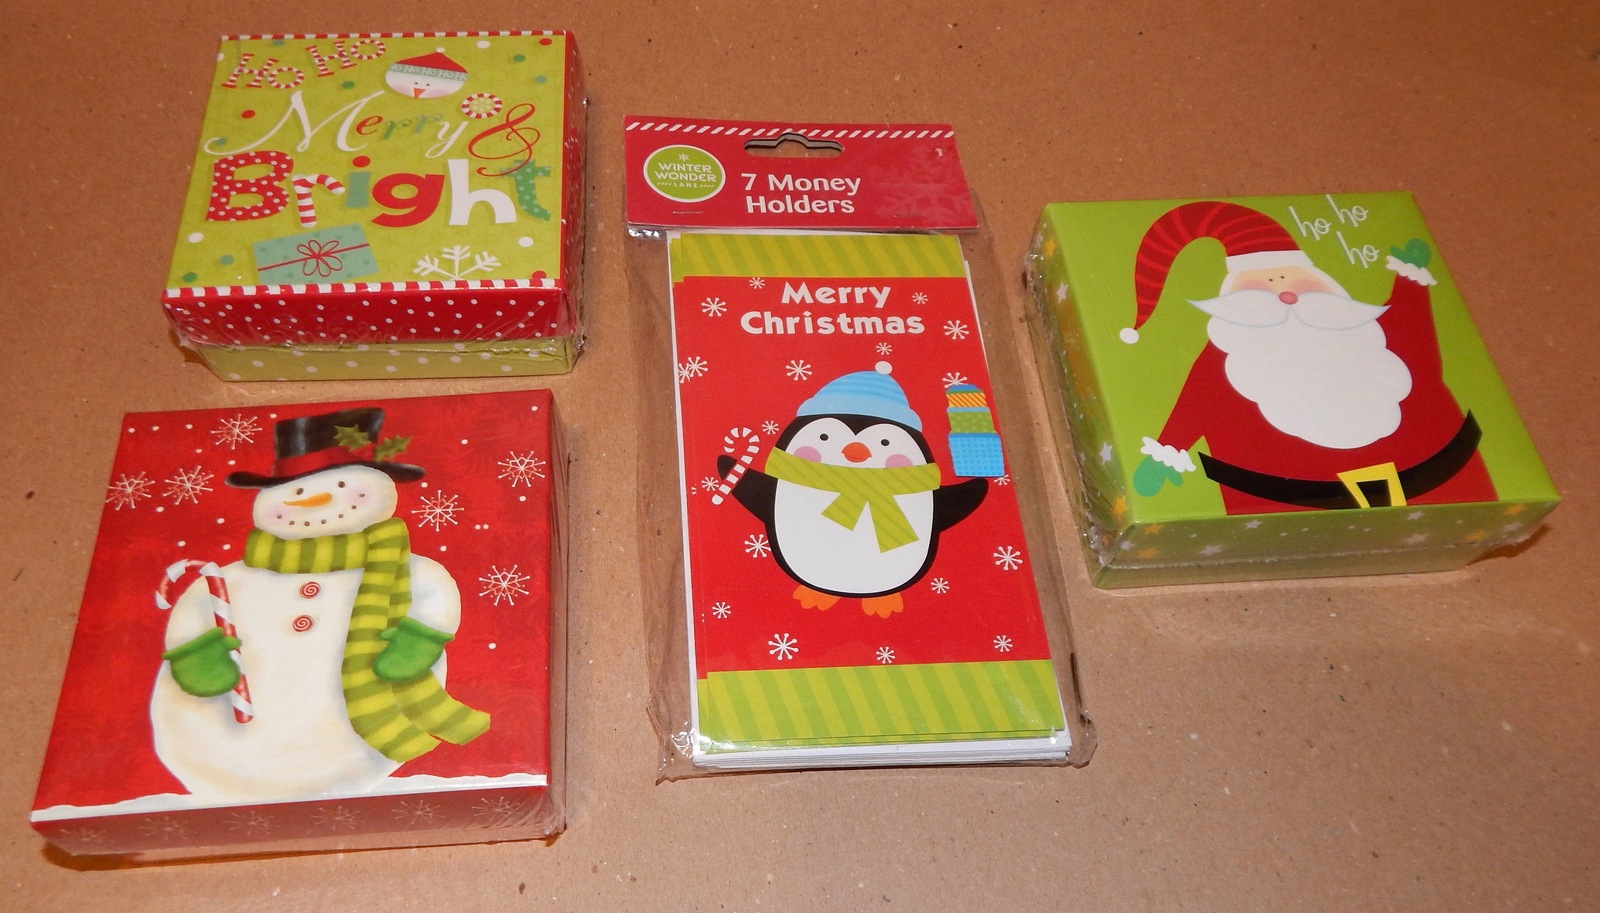 Christmas Money Holders & Gift Card Boxes 4 Items Total Mix Lot By Big Lots 92T - $11.49